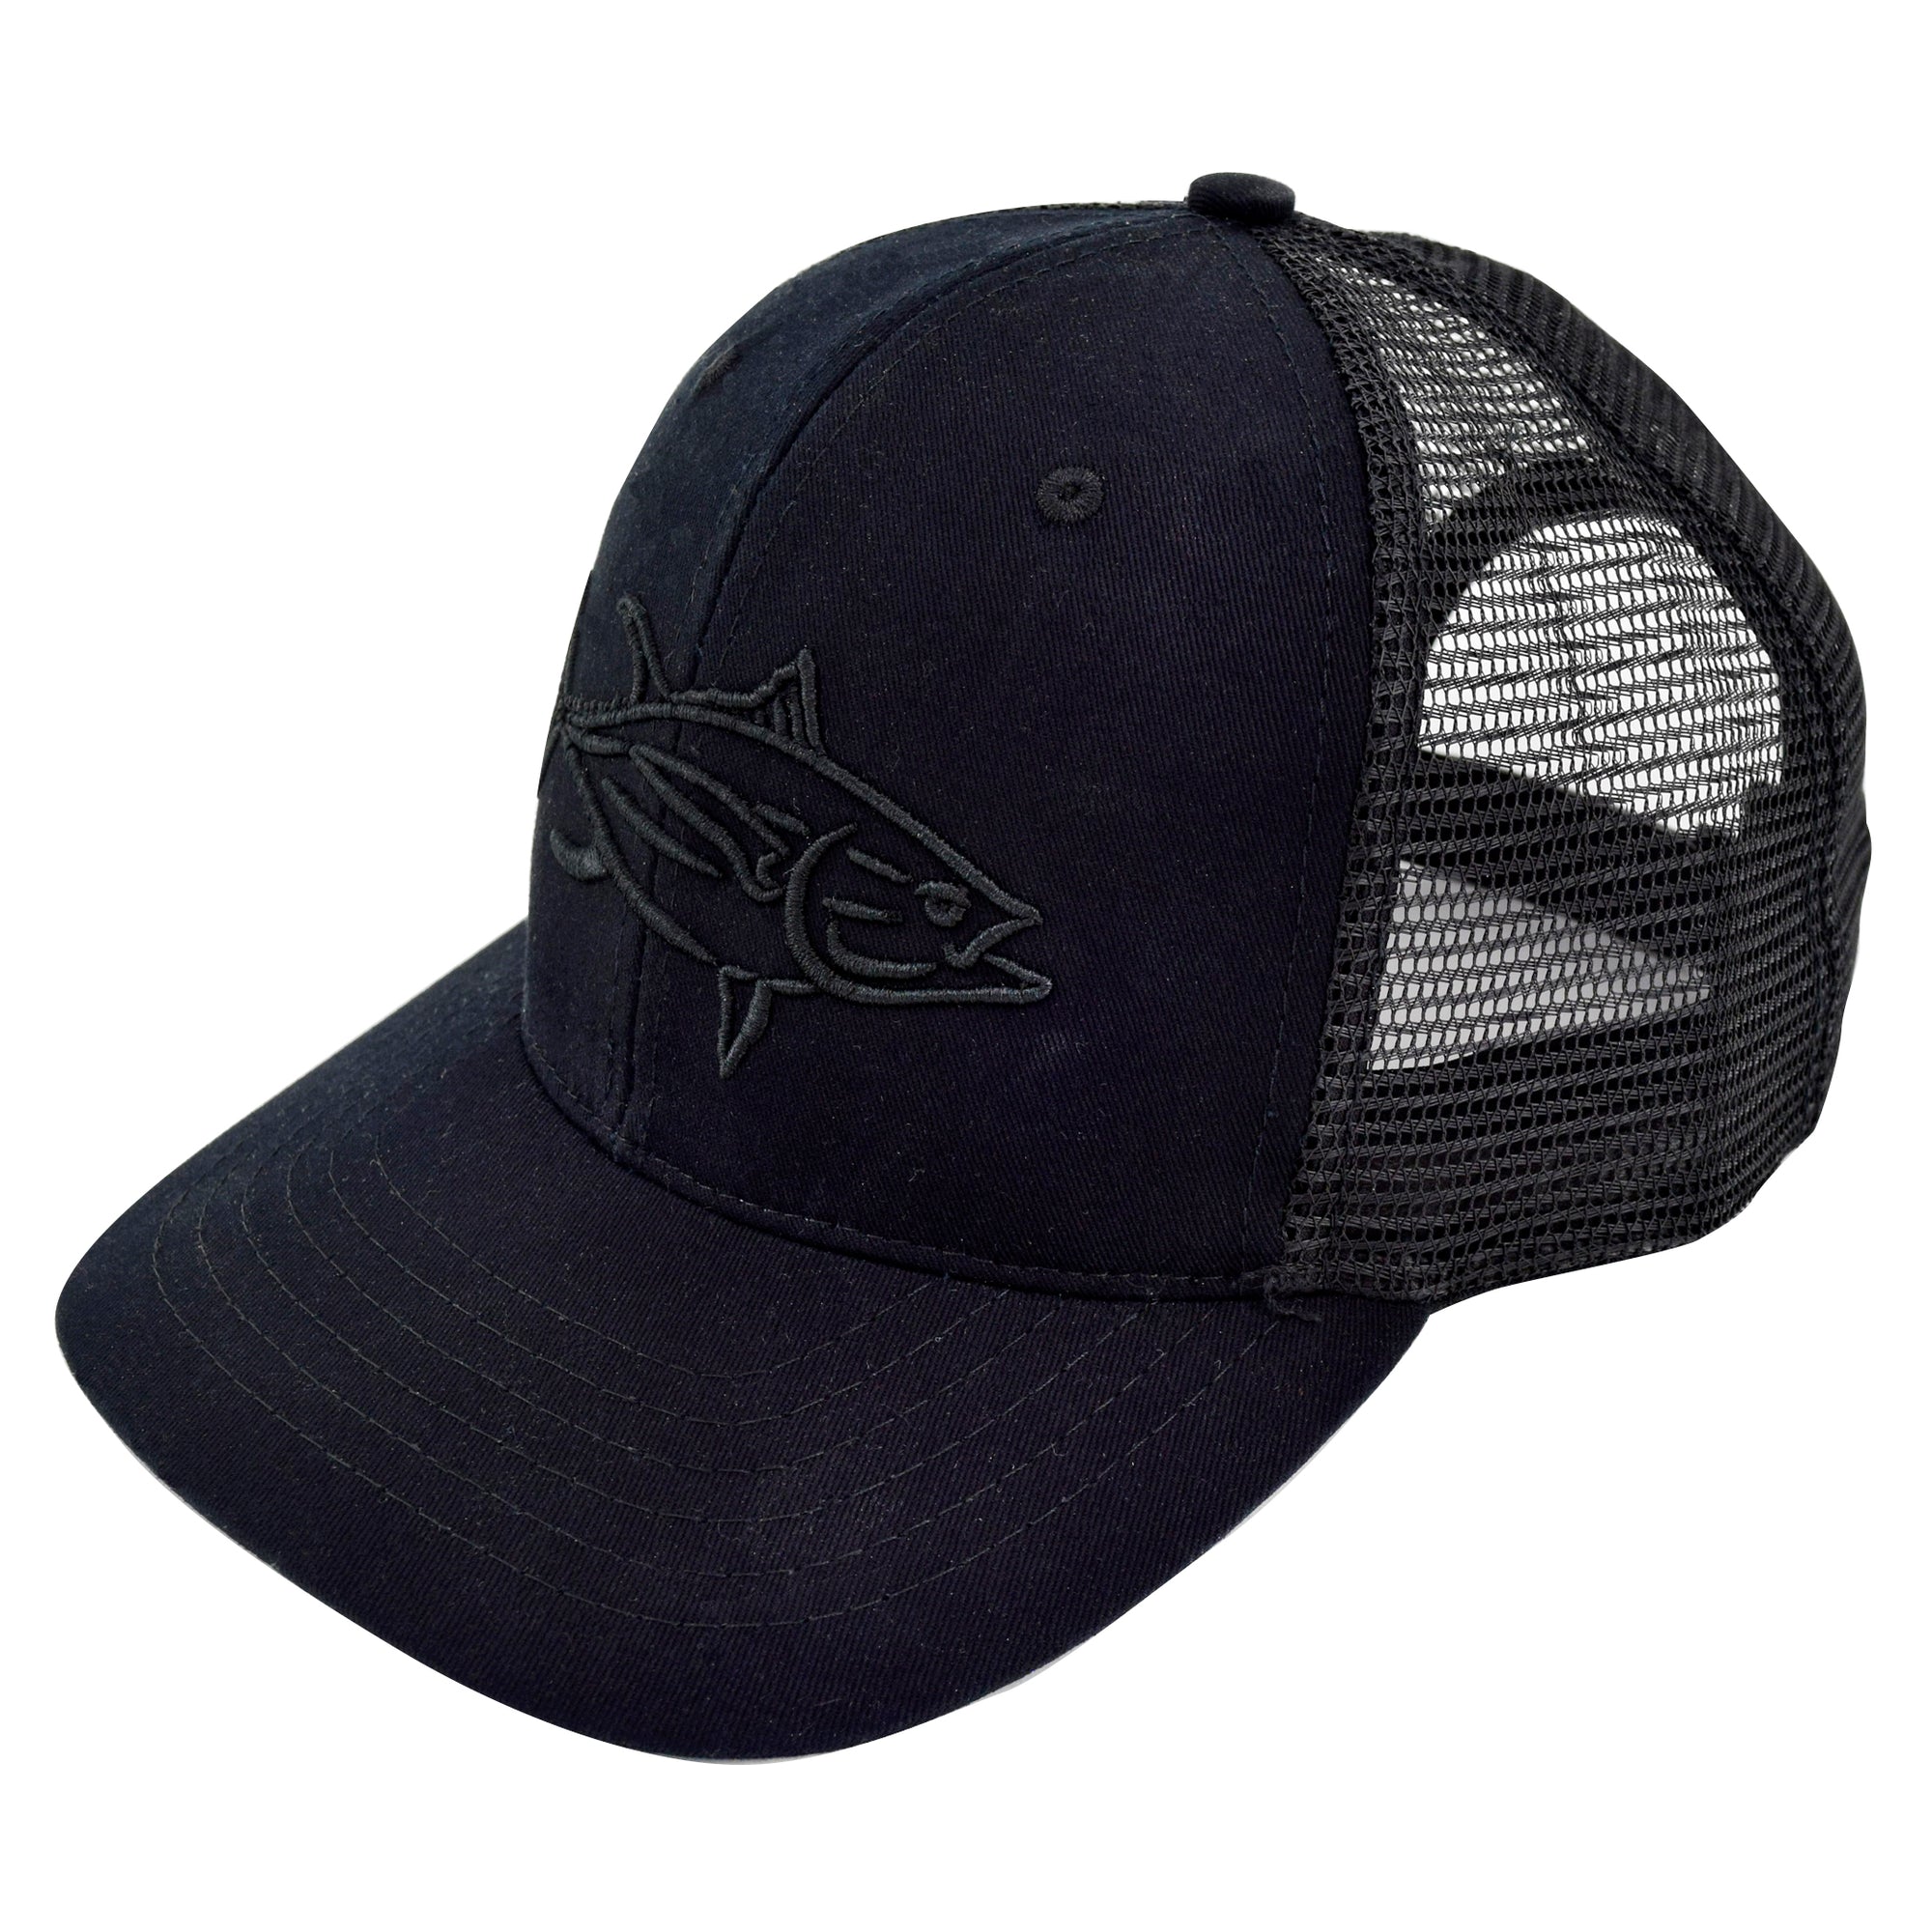 Filthy Tuna Trucker Hat, Black - Filthy Anglers